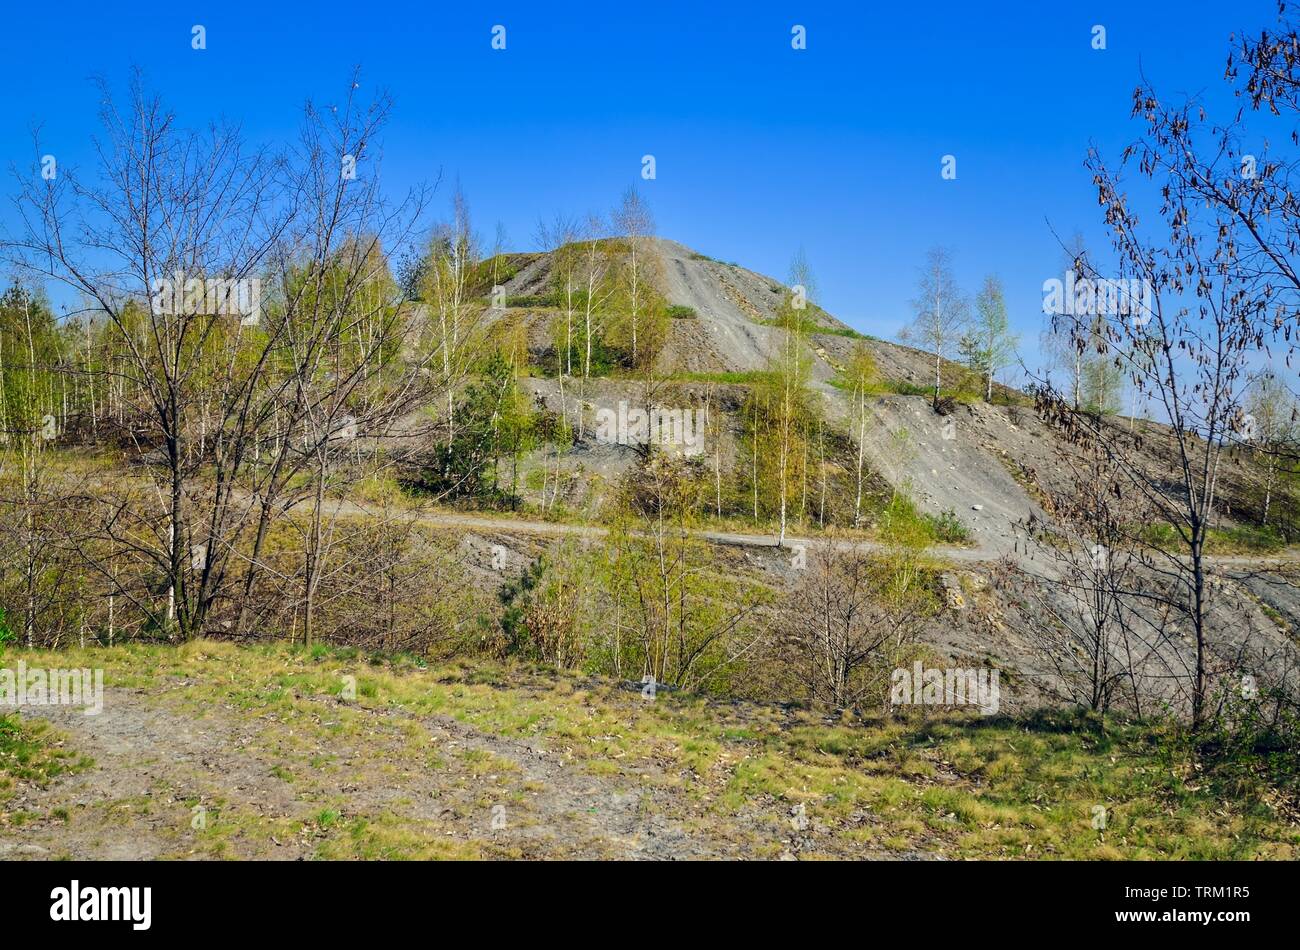 Coal industry in Poland. Mine heap in the spring scenery. Stock Photo